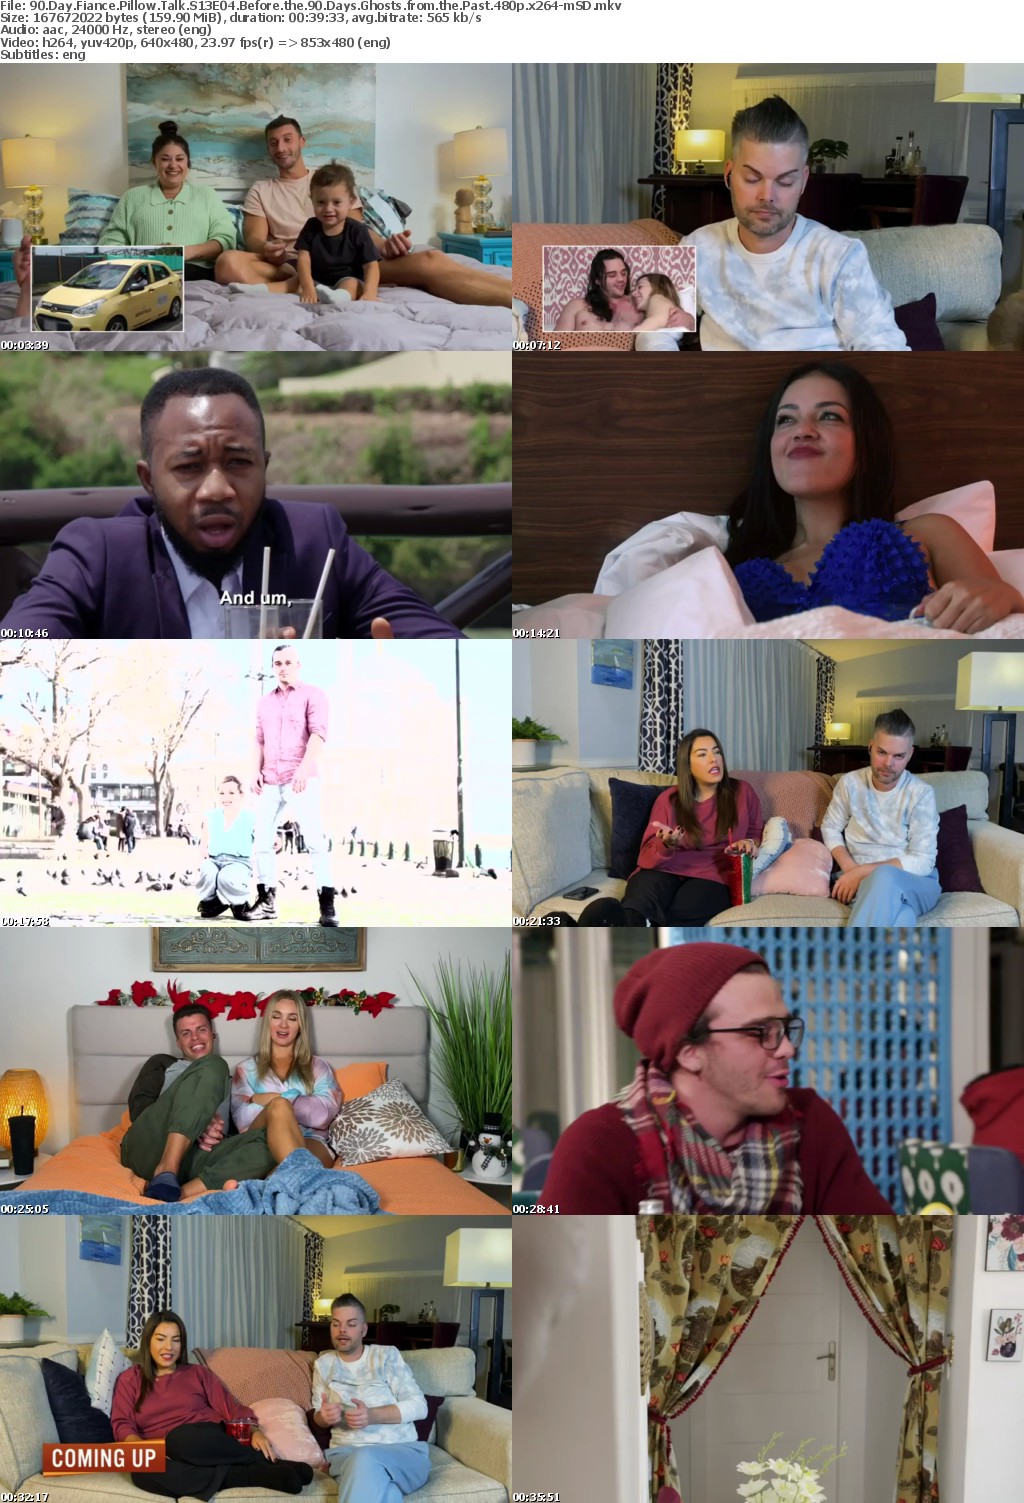 90 Day Fiance Pillow Talk S13E04 Before the 90 Days Ghosts from the Past 480p x264-mSD